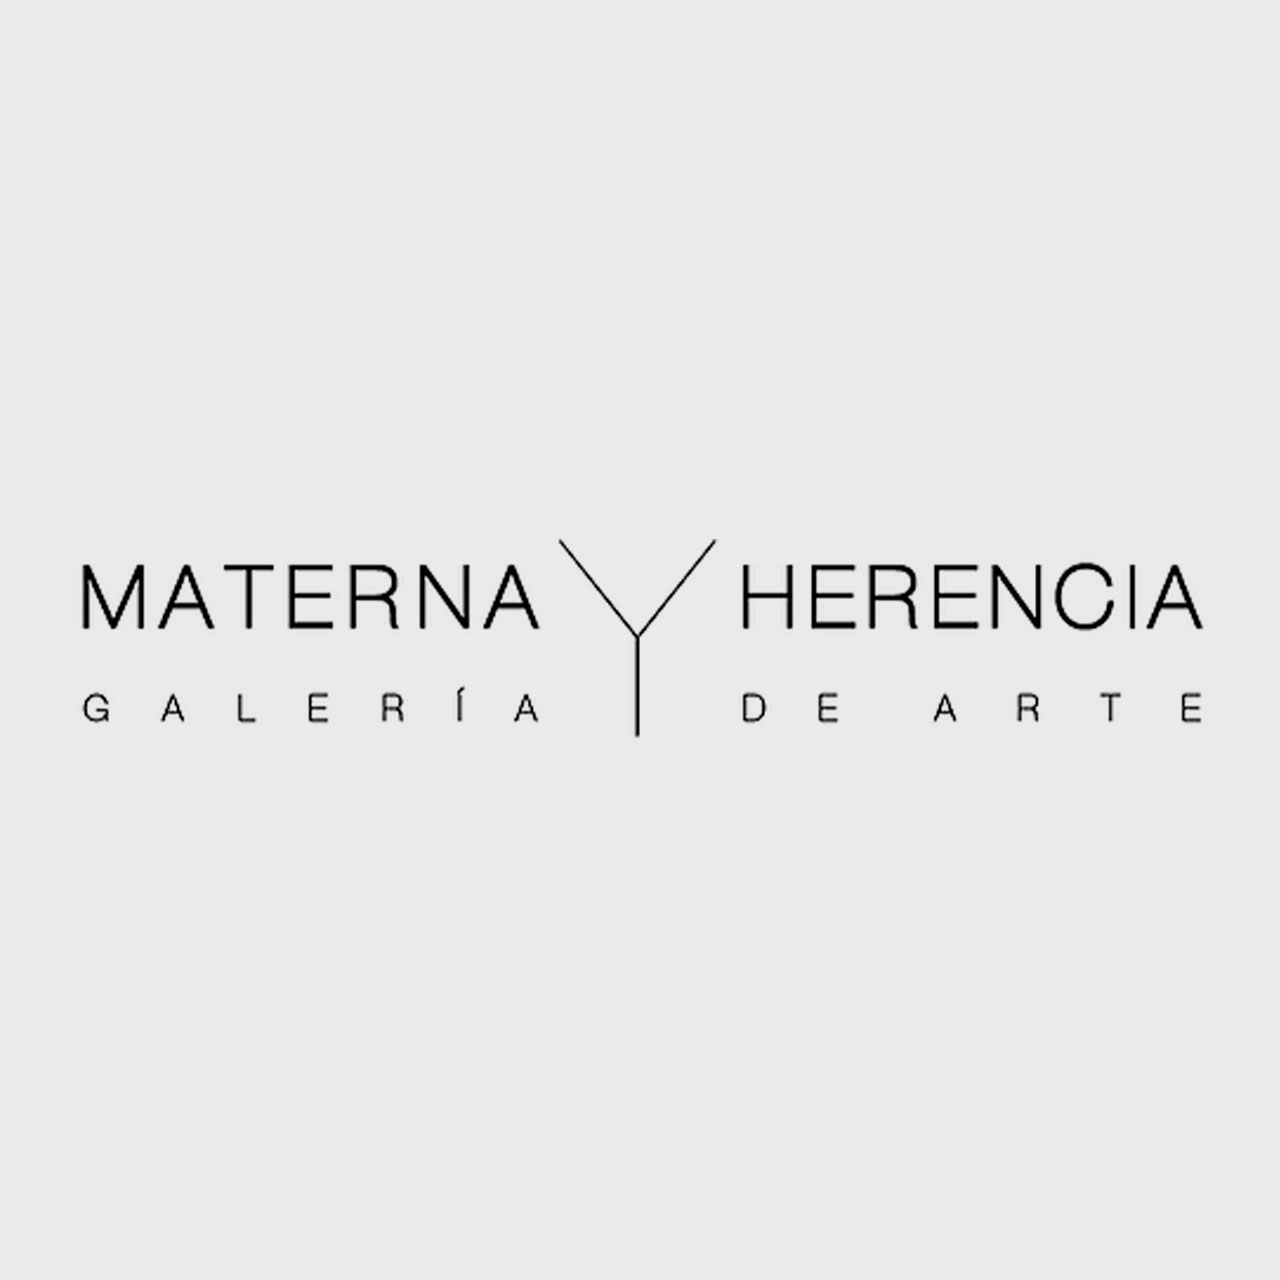 Materna y Herencia